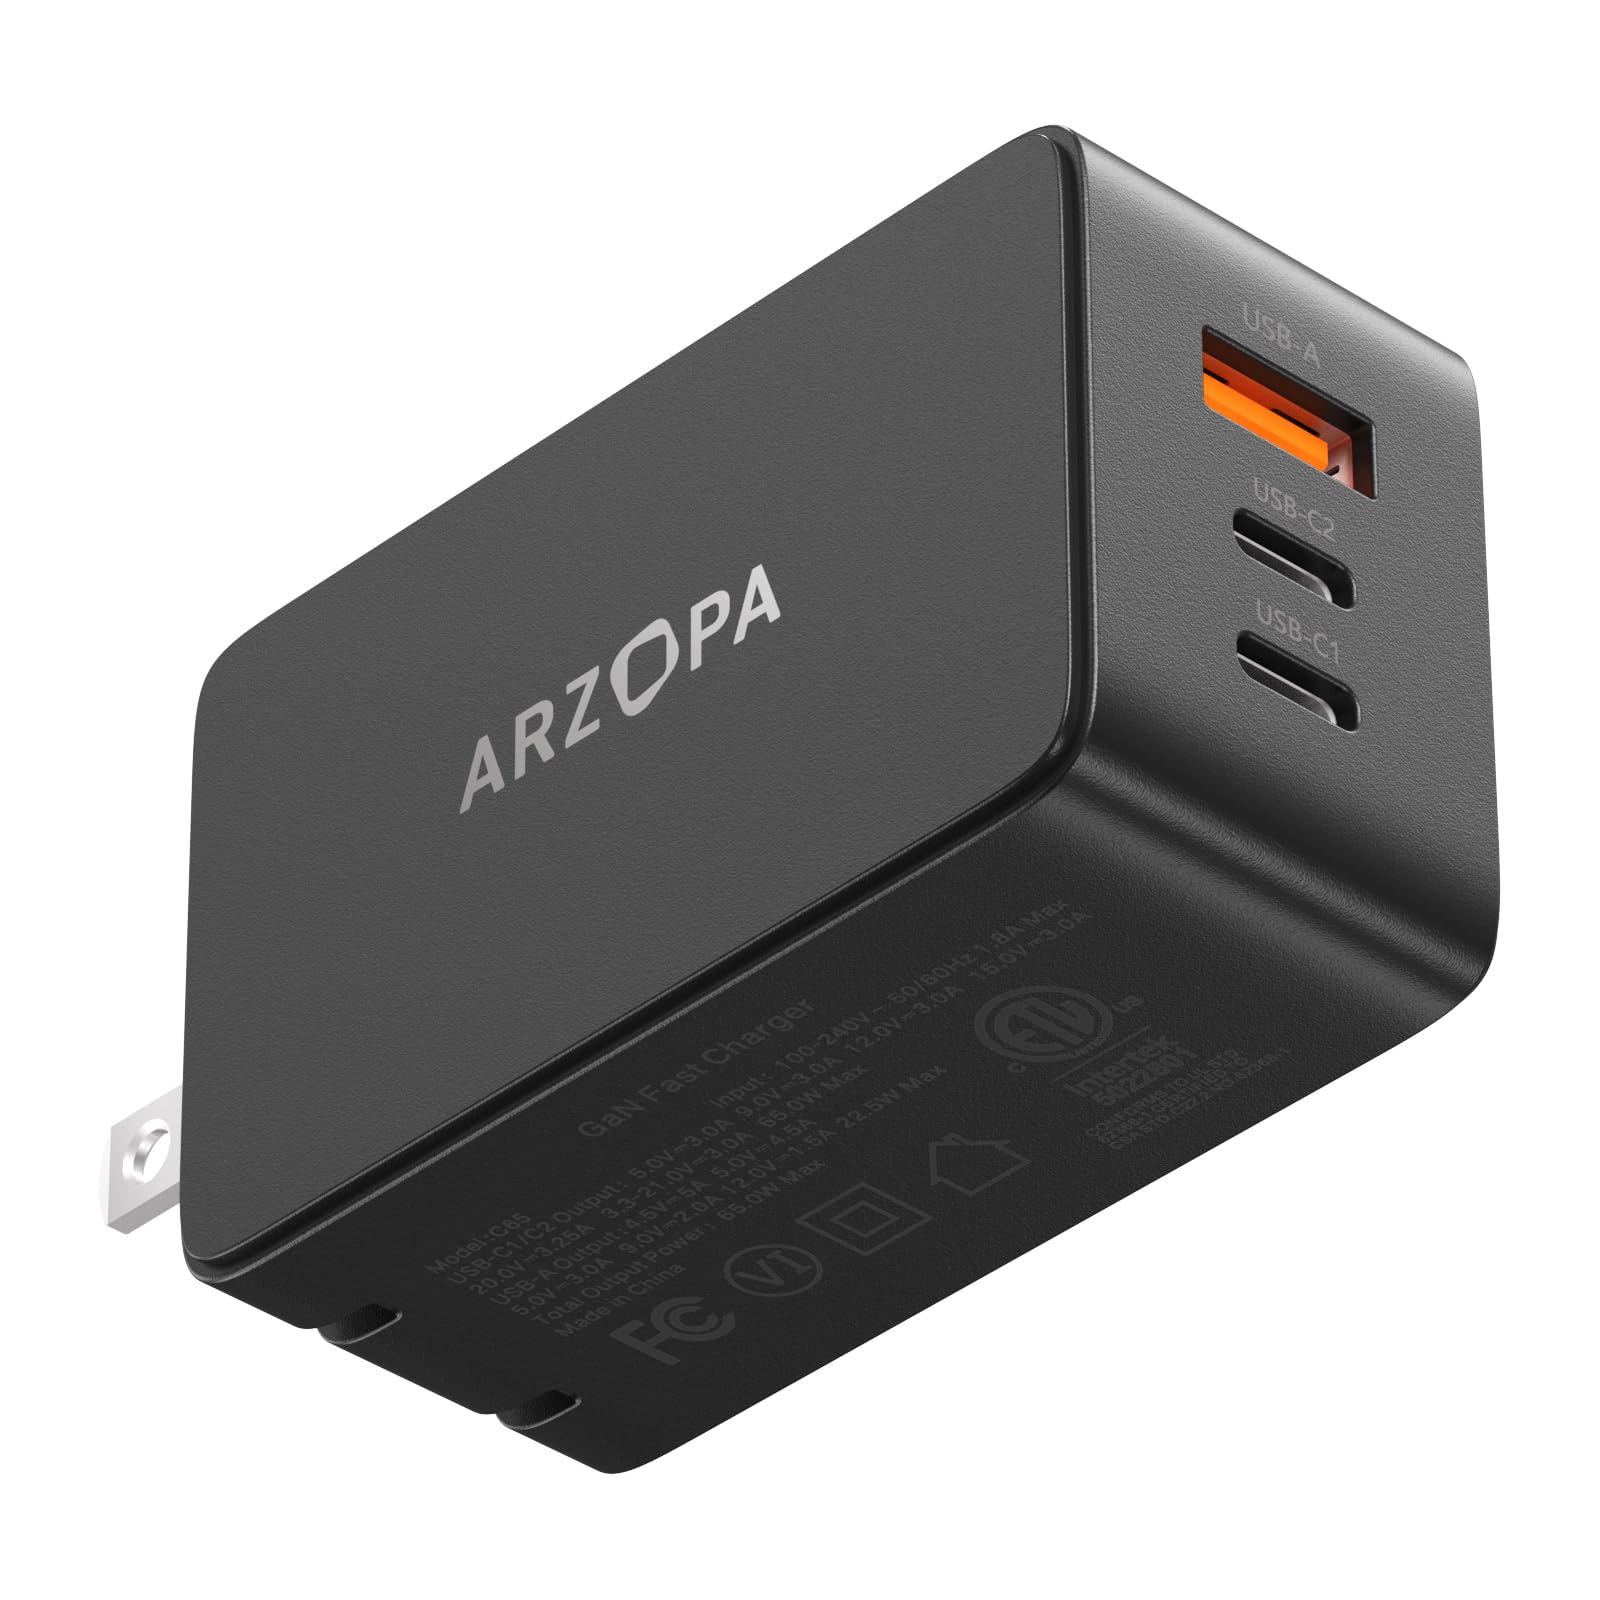 ARZOPA 65W USB C Charger $13.99 - Amazon